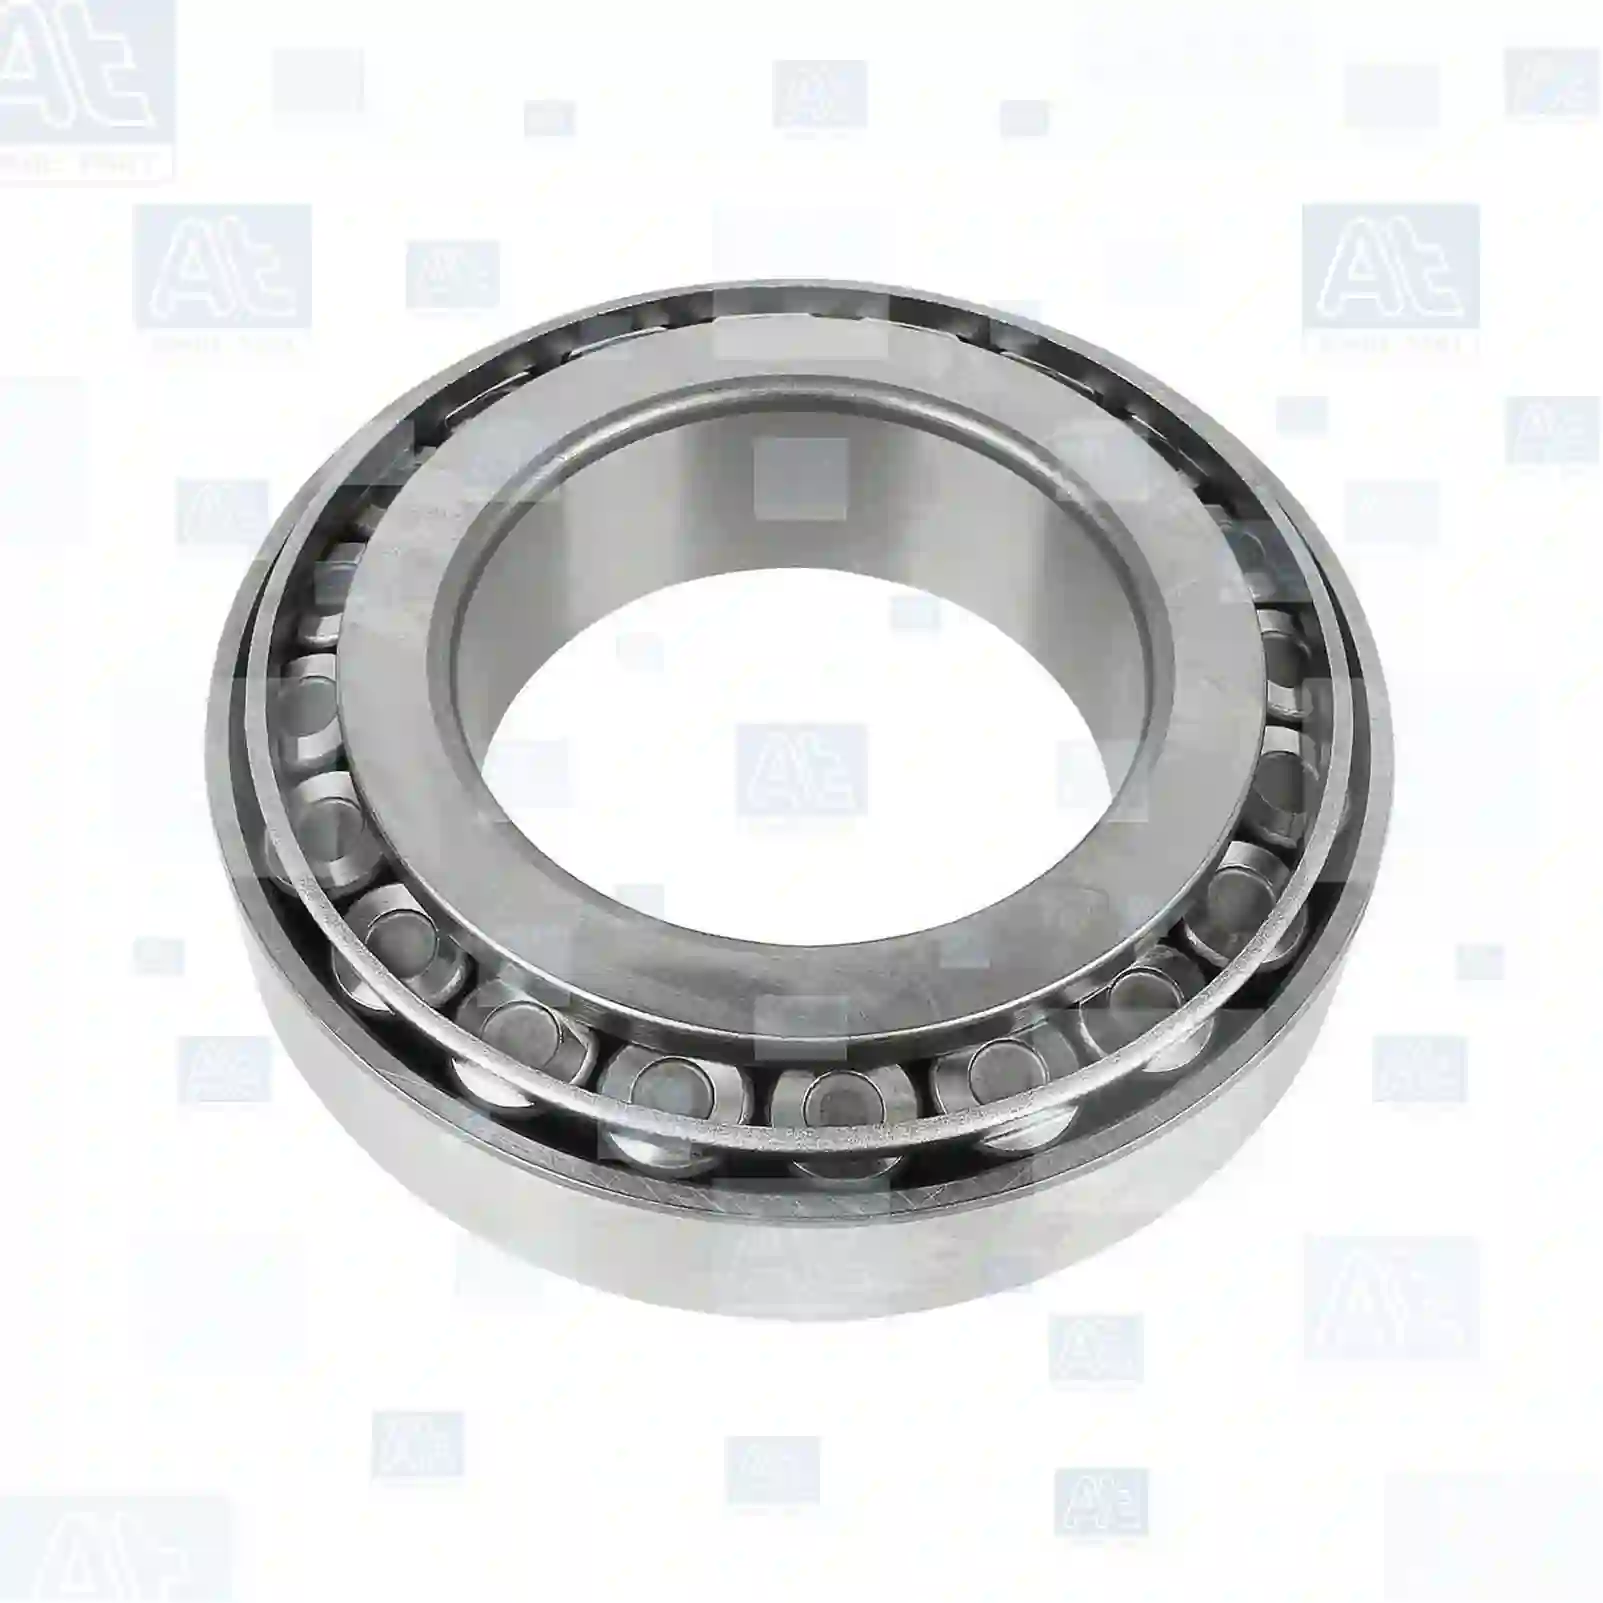 Tapered roller bearing, 77726329, 21040T, 07164544, 26800230, 988485104, 988485104A, 00914219, 01102862, 01905354, 07164544, 1905354, 26800230, 3612948500, 06324901600, 06324990007, 34934200004, 64934200101, 87523301210, 0009812205, 0029811705, 0029811805, 3279810405, 3279812205, MS556521, 40209-90000, 0023432217, 0959232217, 5000020511, 7401524857, 4200002500, 8064032217, 14146, EN568103, 97600-32217, 1524857, ZG03008-0008 ||  77726329 At Spare Part | Engine, Accelerator Pedal, Camshaft, Connecting Rod, Crankcase, Crankshaft, Cylinder Head, Engine Suspension Mountings, Exhaust Manifold, Exhaust Gas Recirculation, Filter Kits, Flywheel Housing, General Overhaul Kits, Engine, Intake Manifold, Oil Cleaner, Oil Cooler, Oil Filter, Oil Pump, Oil Sump, Piston & Liner, Sensor & Switch, Timing Case, Turbocharger, Cooling System, Belt Tensioner, Coolant Filter, Coolant Pipe, Corrosion Prevention Agent, Drive, Expansion Tank, Fan, Intercooler, Monitors & Gauges, Radiator, Thermostat, V-Belt / Timing belt, Water Pump, Fuel System, Electronical Injector Unit, Feed Pump, Fuel Filter, cpl., Fuel Gauge Sender,  Fuel Line, Fuel Pump, Fuel Tank, Injection Line Kit, Injection Pump, Exhaust System, Clutch & Pedal, Gearbox, Propeller Shaft, Axles, Brake System, Hubs & Wheels, Suspension, Leaf Spring, Universal Parts / Accessories, Steering, Electrical System, Cabin Tapered roller bearing, 77726329, 21040T, 07164544, 26800230, 988485104, 988485104A, 00914219, 01102862, 01905354, 07164544, 1905354, 26800230, 3612948500, 06324901600, 06324990007, 34934200004, 64934200101, 87523301210, 0009812205, 0029811705, 0029811805, 3279810405, 3279812205, MS556521, 40209-90000, 0023432217, 0959232217, 5000020511, 7401524857, 4200002500, 8064032217, 14146, EN568103, 97600-32217, 1524857, ZG03008-0008 ||  77726329 At Spare Part | Engine, Accelerator Pedal, Camshaft, Connecting Rod, Crankcase, Crankshaft, Cylinder Head, Engine Suspension Mountings, Exhaust Manifold, Exhaust Gas Recirculation, Filter Kits, Flywheel Housing, General Overhaul Kits, Engine, Intake Manifold, Oil Cleaner, Oil Cooler, Oil Filter, Oil Pump, Oil Sump, Piston & Liner, Sensor & Switch, Timing Case, Turbocharger, Cooling System, Belt Tensioner, Coolant Filter, Coolant Pipe, Corrosion Prevention Agent, Drive, Expansion Tank, Fan, Intercooler, Monitors & Gauges, Radiator, Thermostat, V-Belt / Timing belt, Water Pump, Fuel System, Electronical Injector Unit, Feed Pump, Fuel Filter, cpl., Fuel Gauge Sender,  Fuel Line, Fuel Pump, Fuel Tank, Injection Line Kit, Injection Pump, Exhaust System, Clutch & Pedal, Gearbox, Propeller Shaft, Axles, Brake System, Hubs & Wheels, Suspension, Leaf Spring, Universal Parts / Accessories, Steering, Electrical System, Cabin